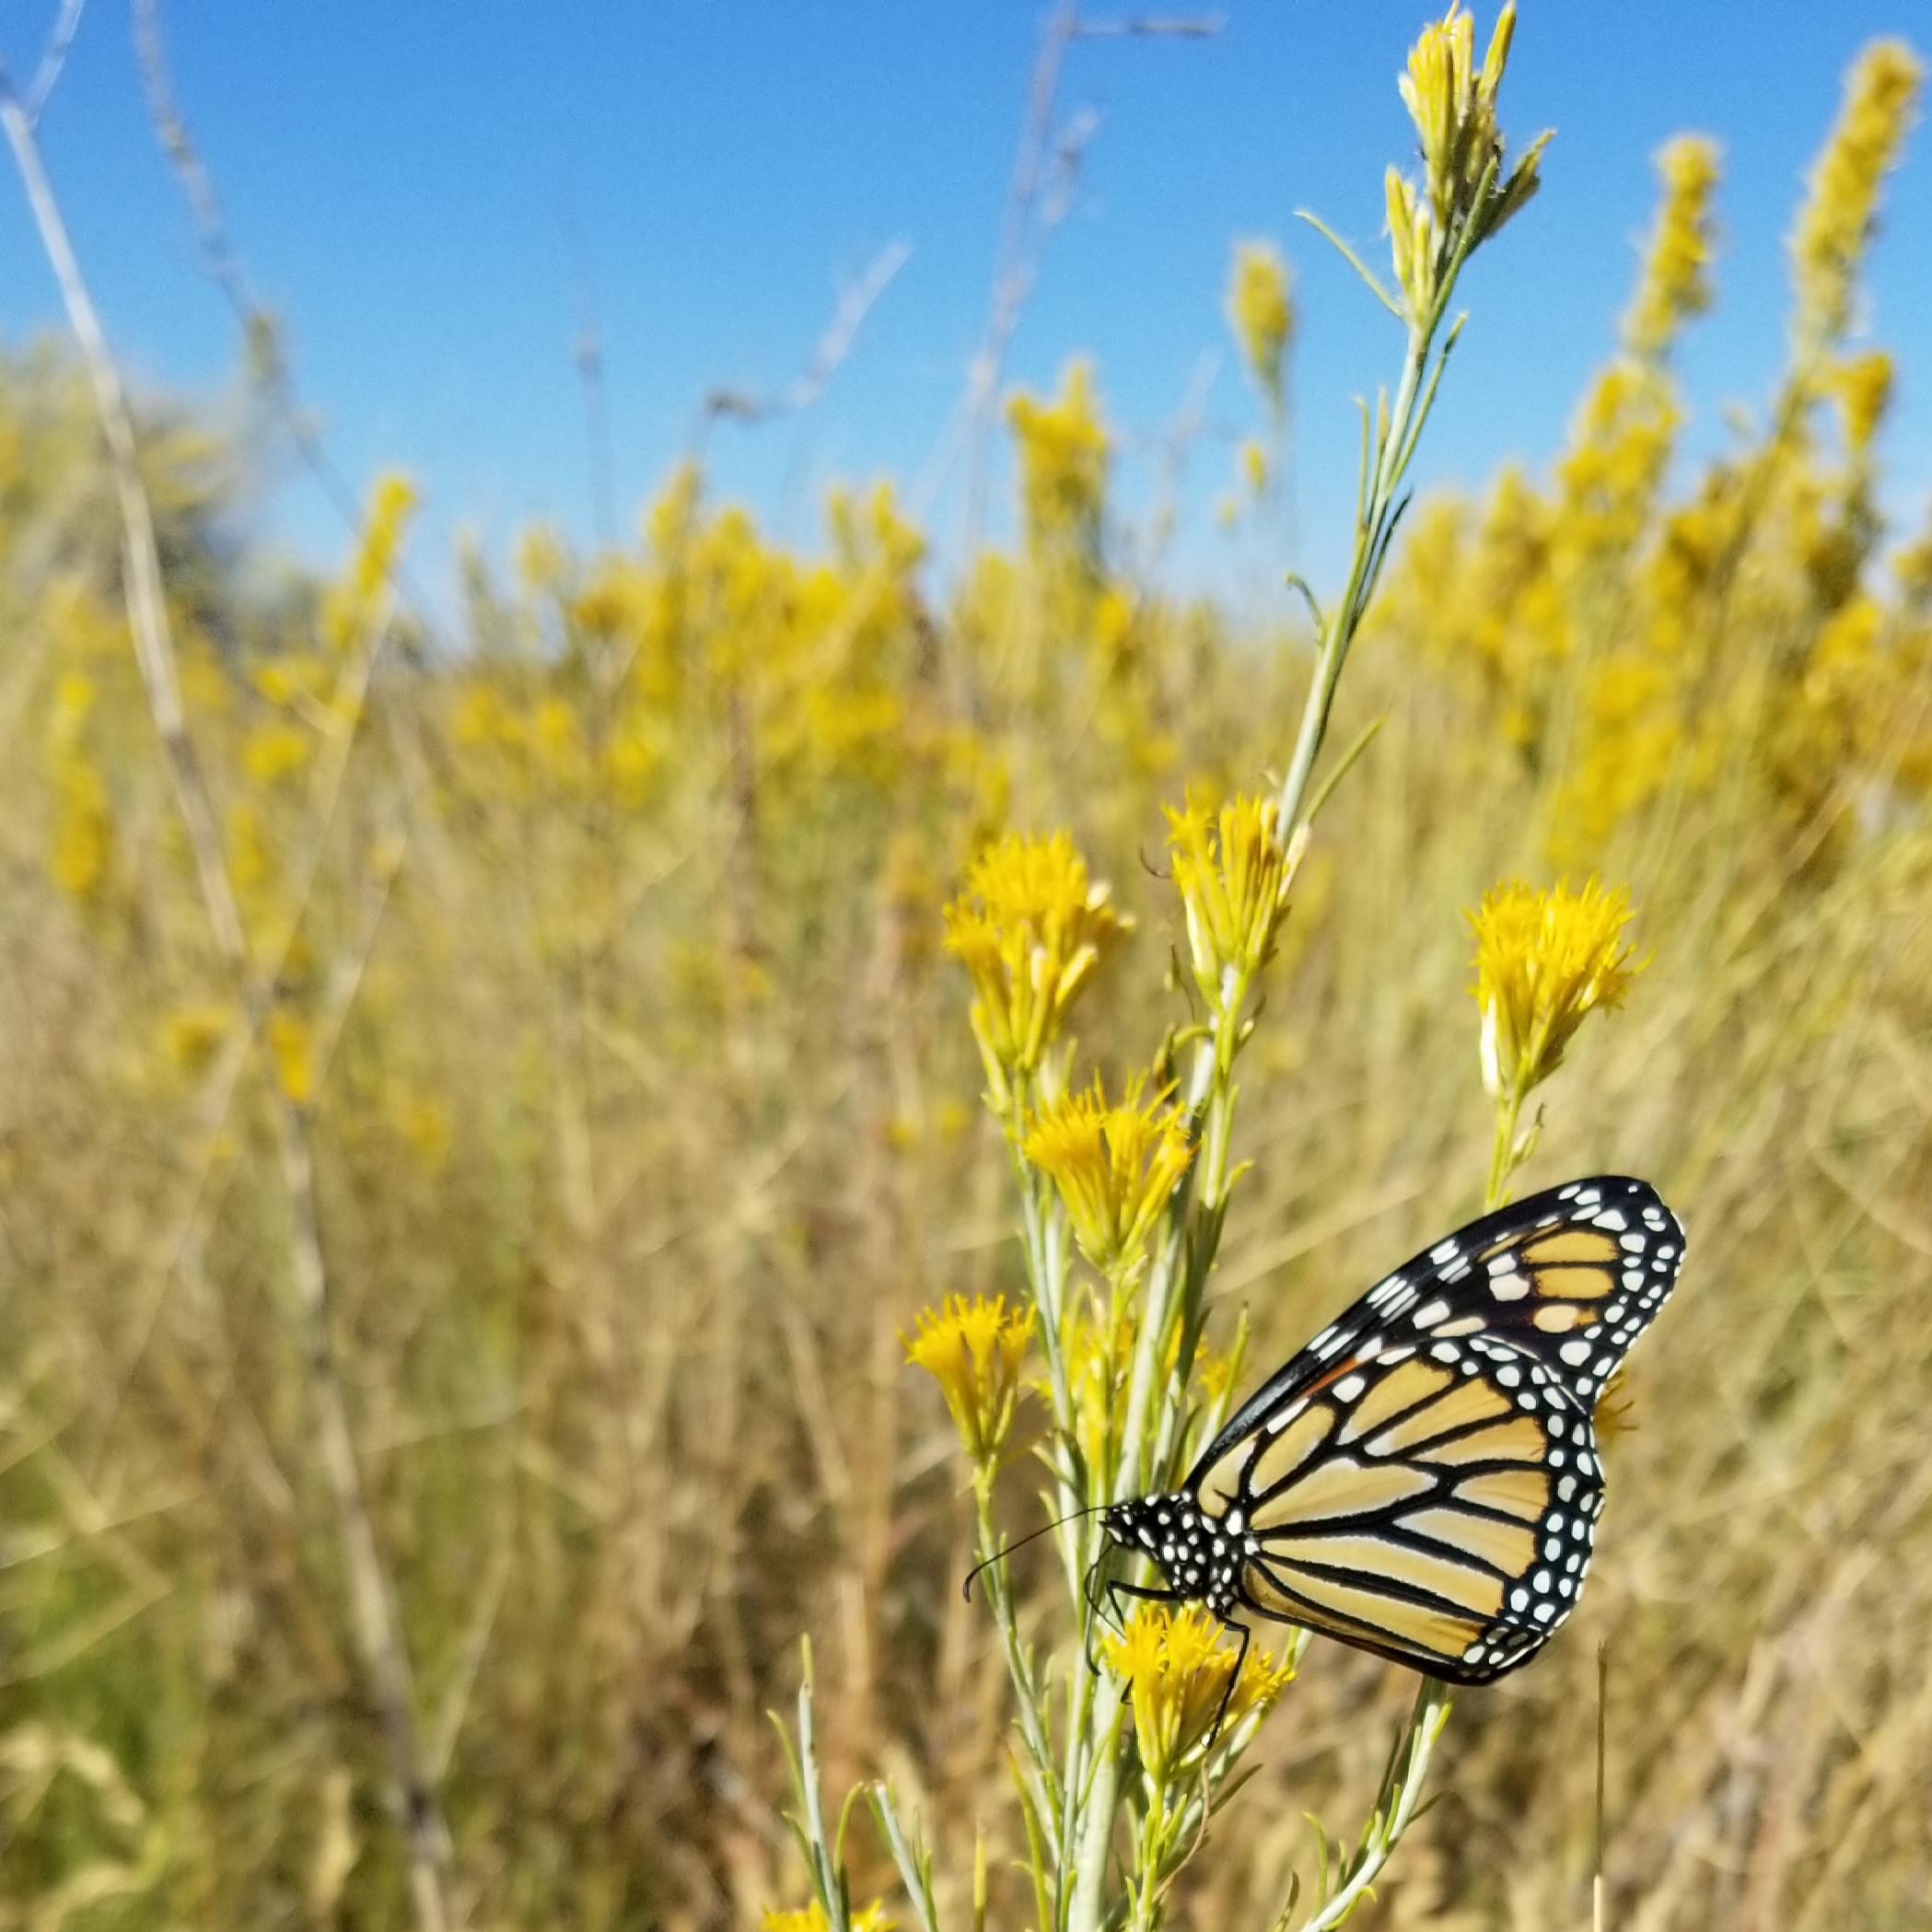 A monarch clings to a stalk bursting with yellow flowers, in an arid landscape.